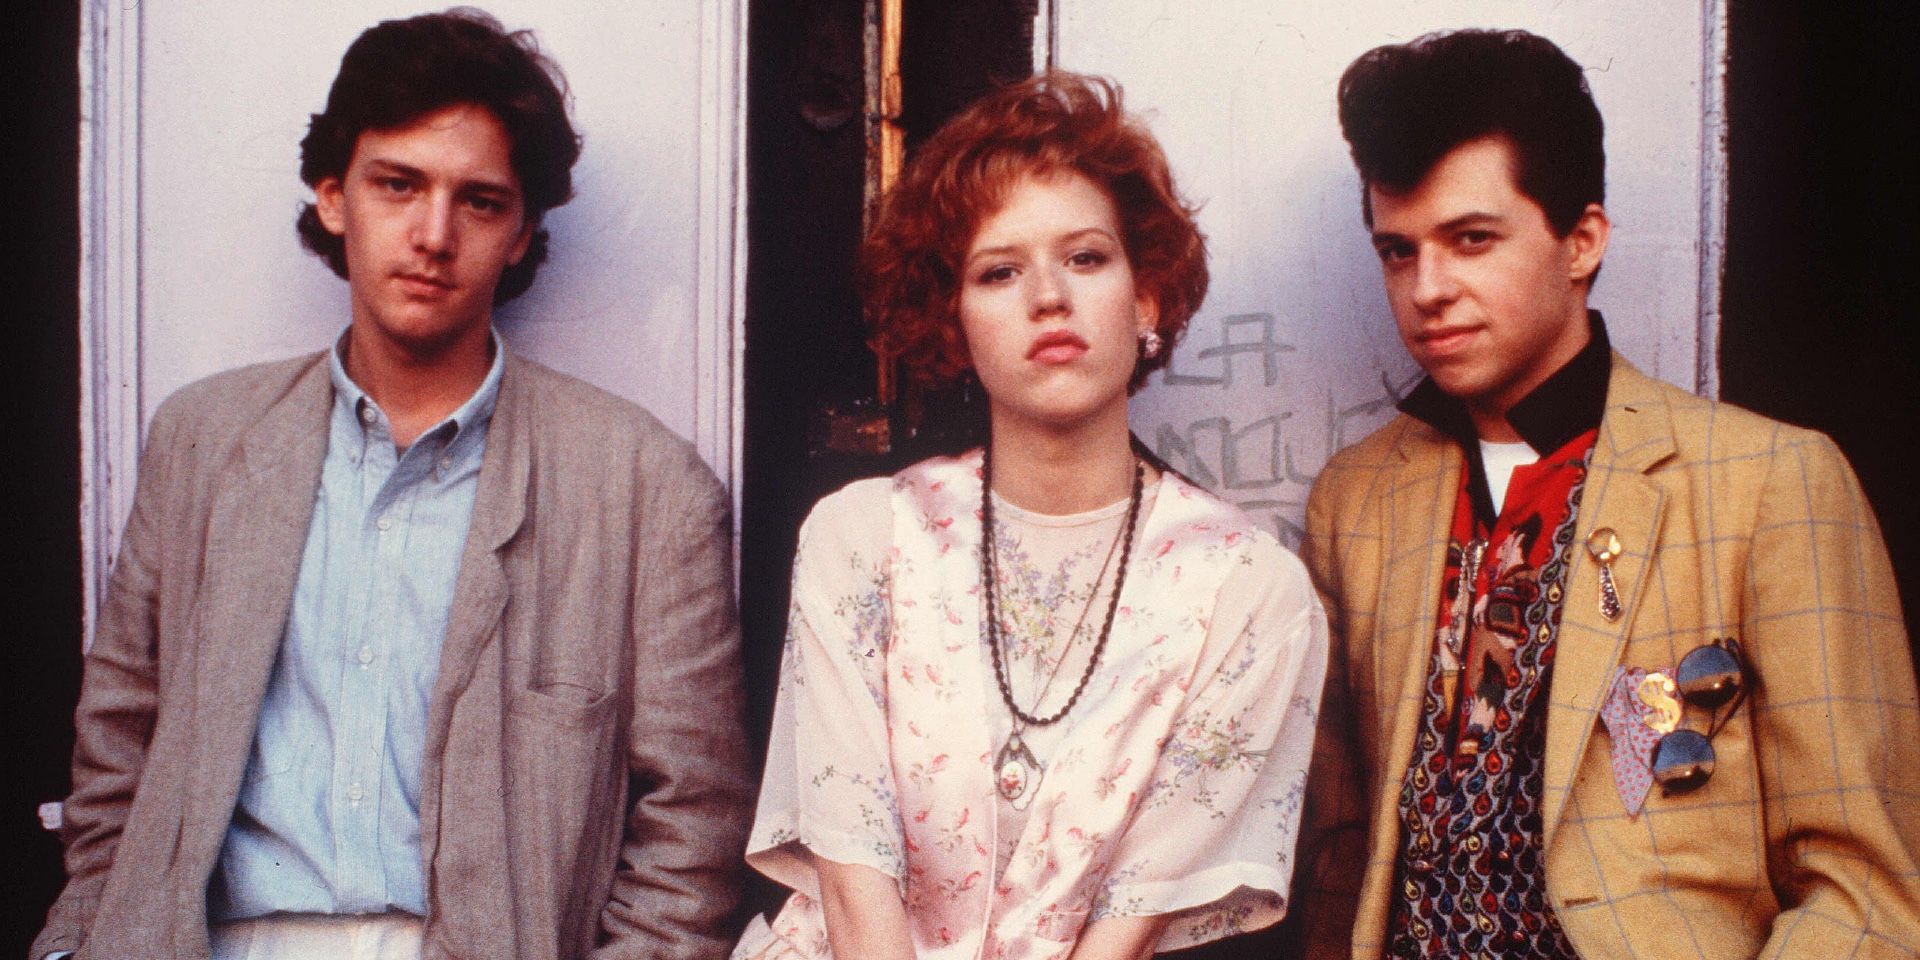 Blane, Andie, and Dickie from Pretty In Pink